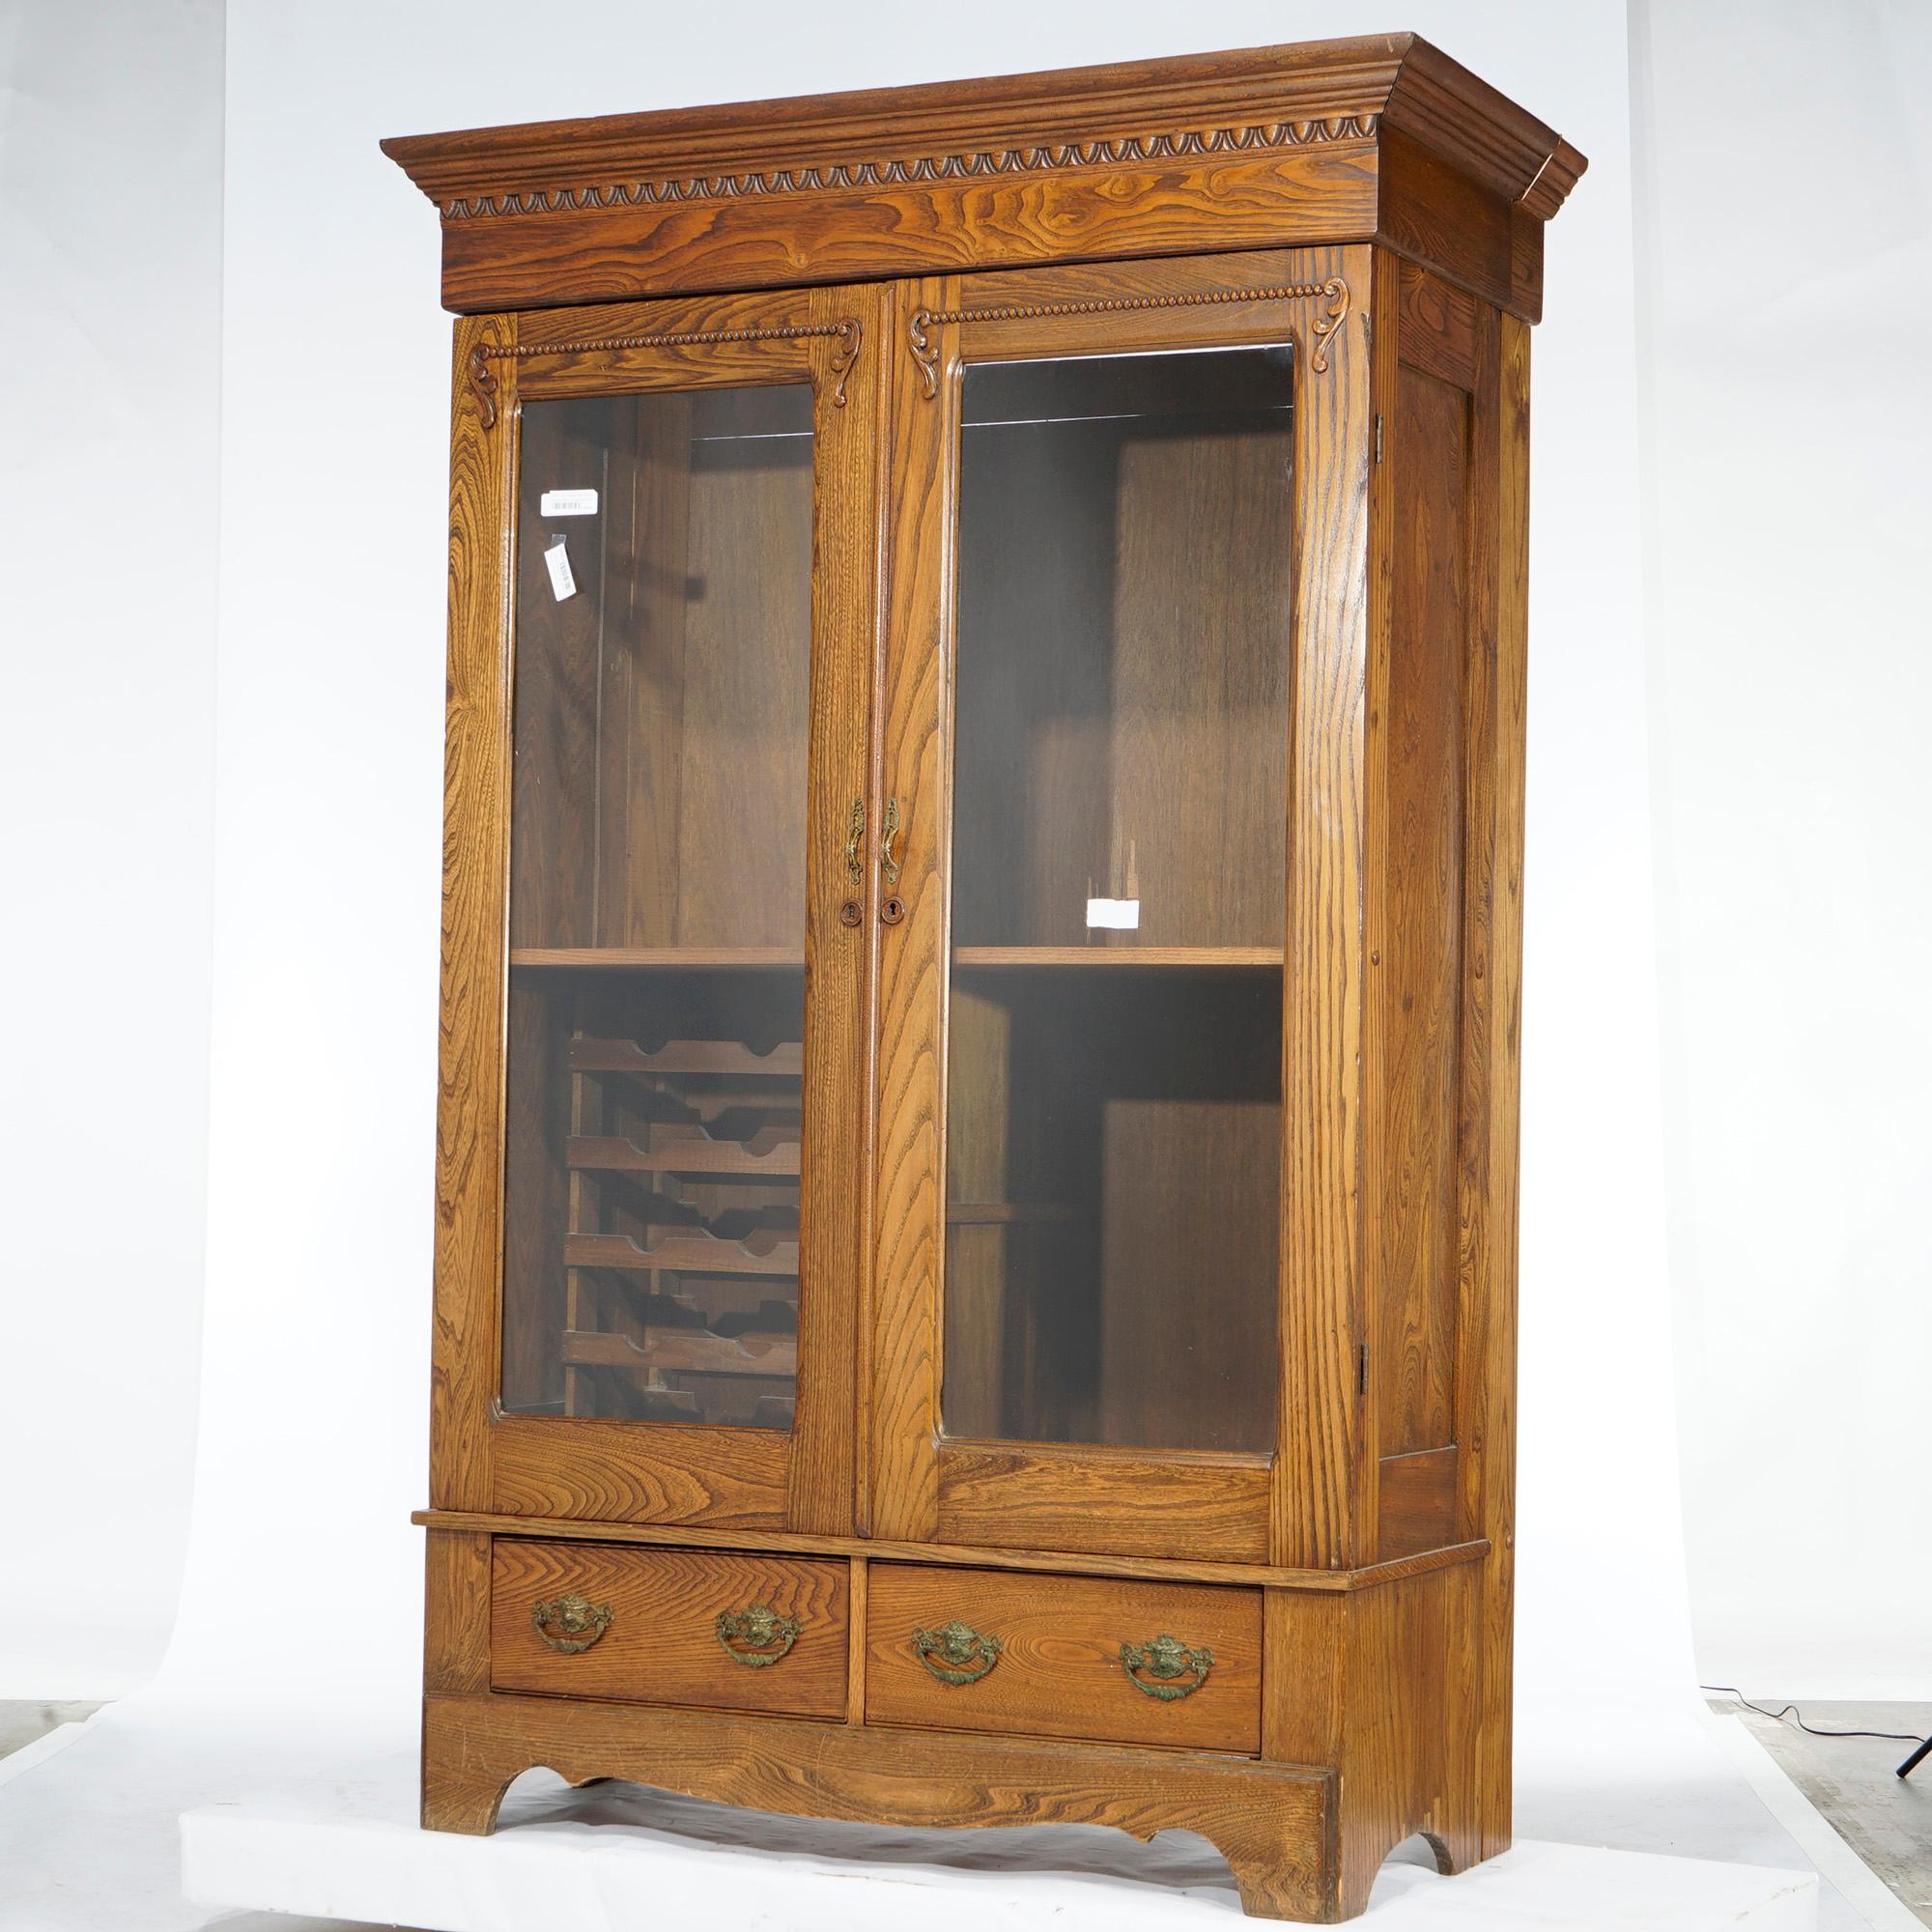 An antique Arts and Crafts bookcase (modified into an entertainment center) offers quarter sawn oak construction with double glass doors opening to shelved interior with lower wine rack over two drawers and raised on bracket feet, later added cord